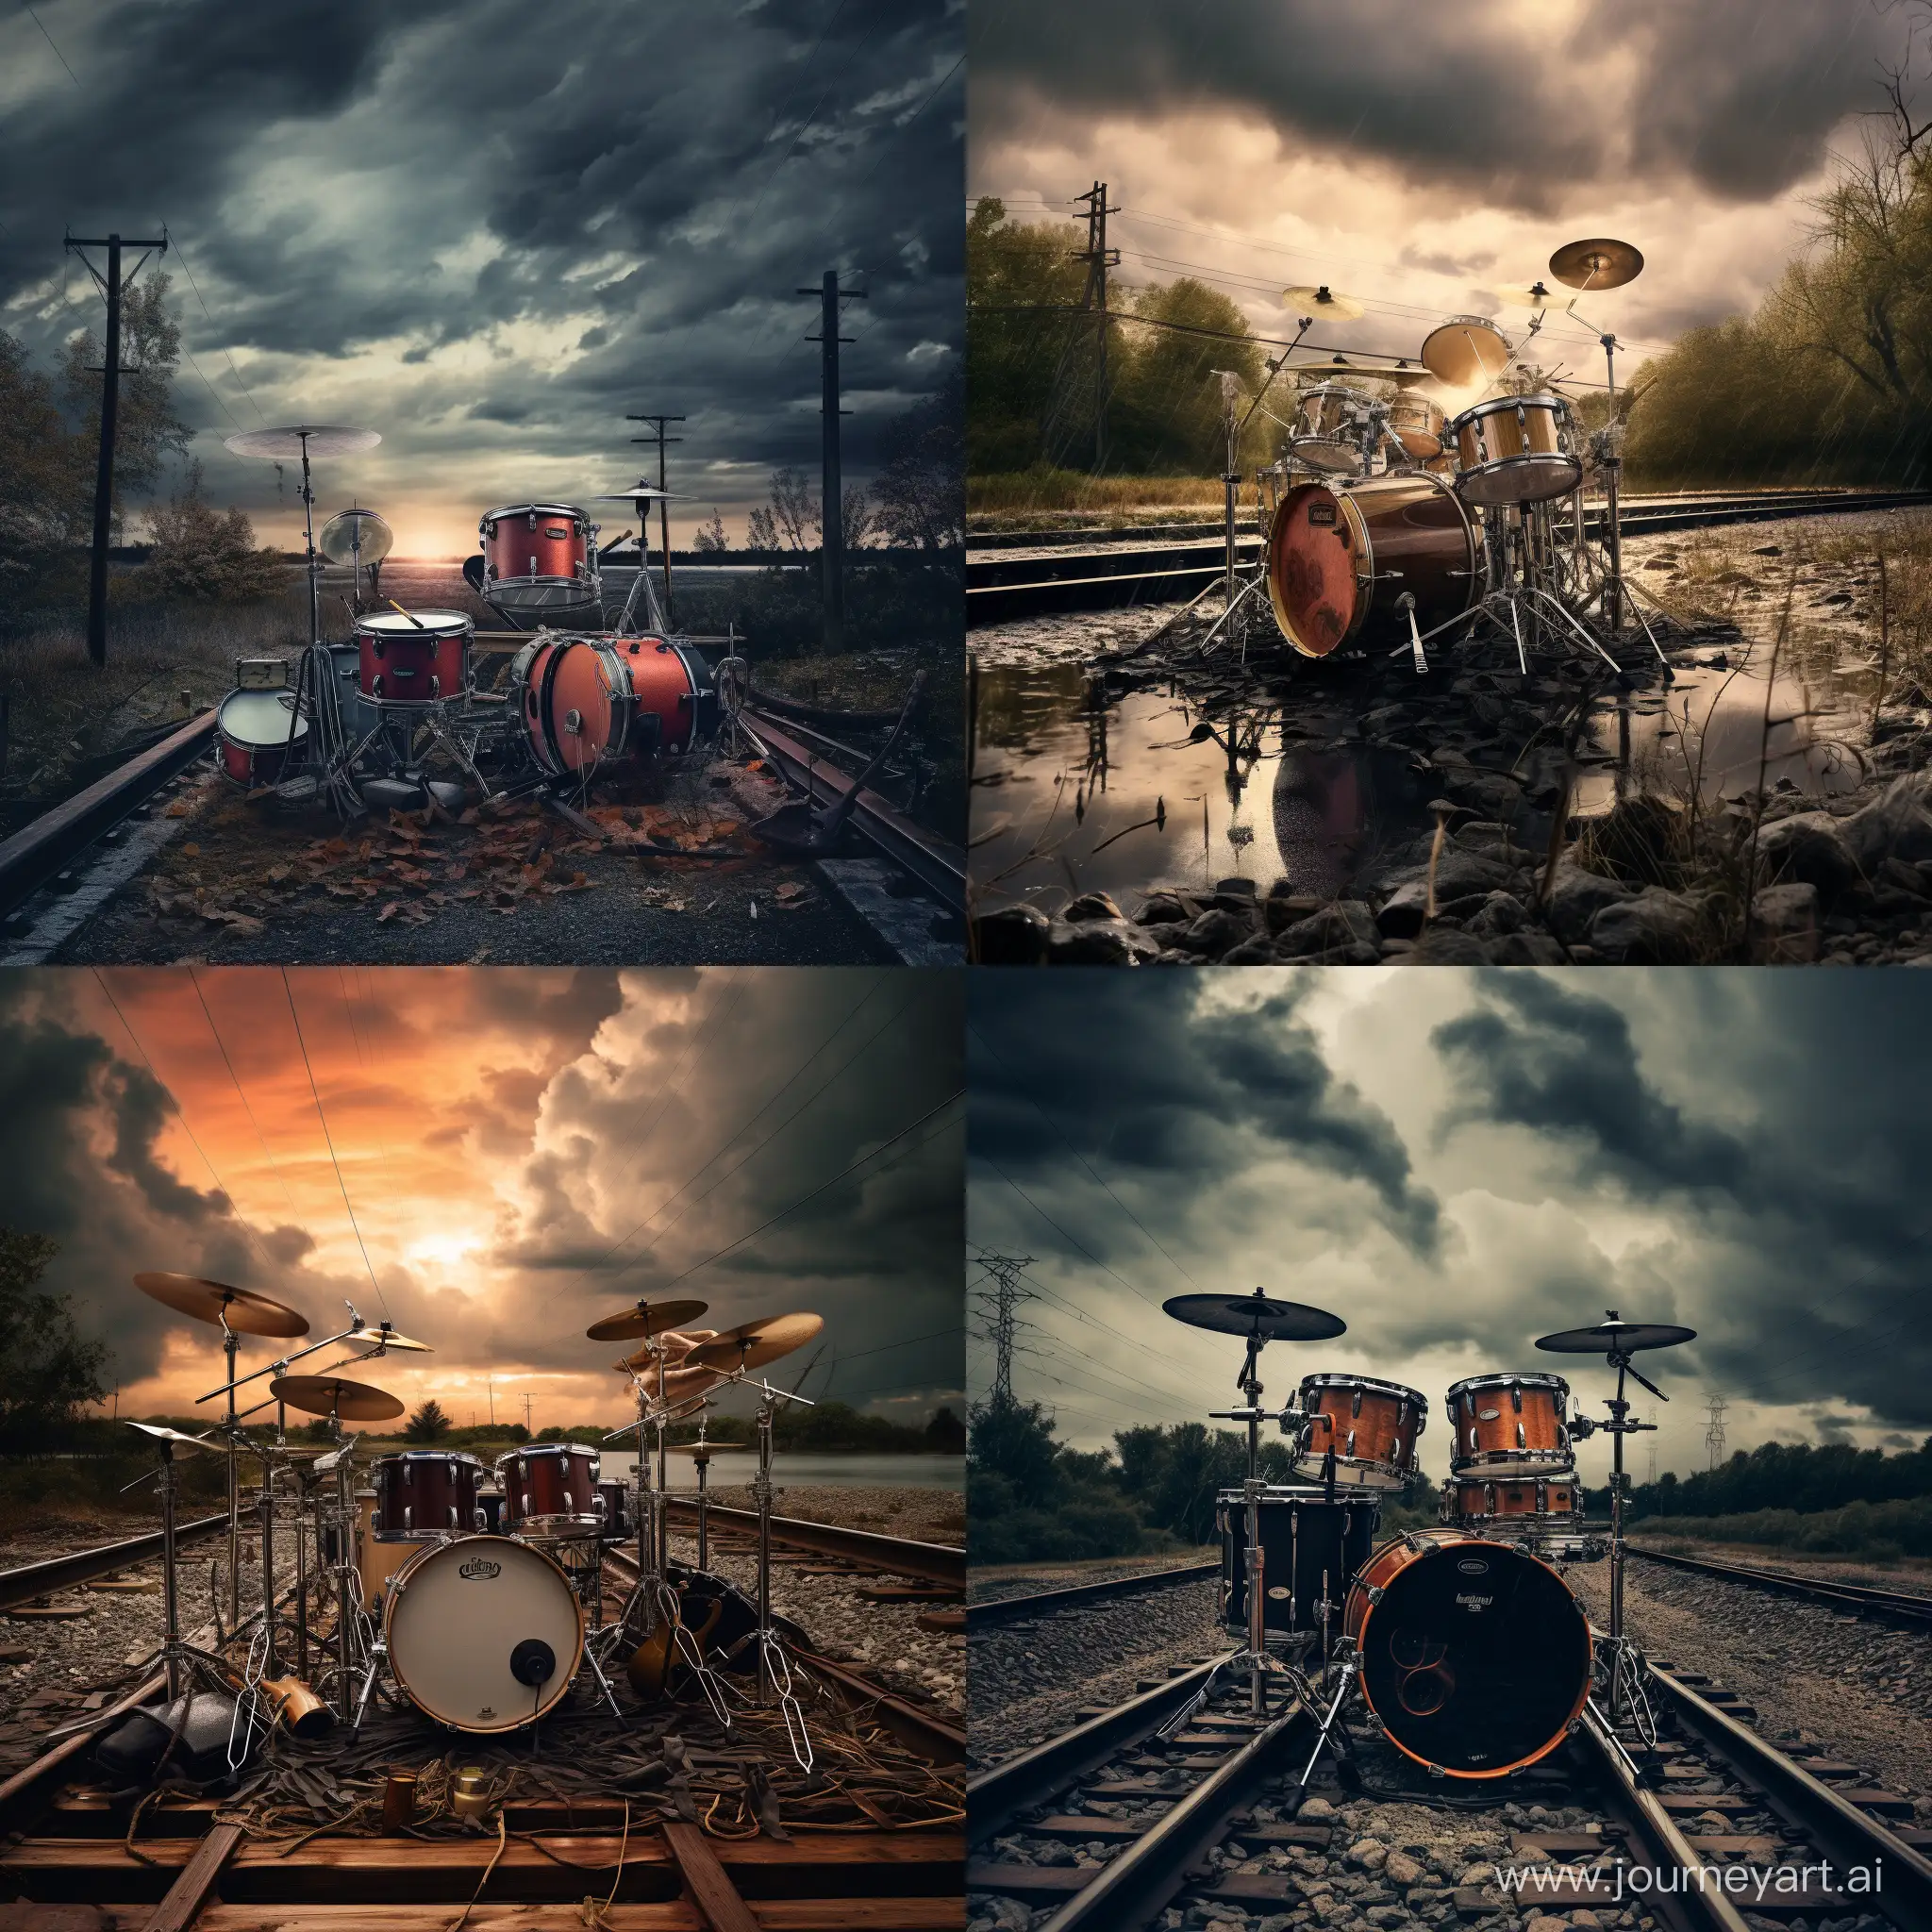 a drum kit at the end of a moving train, looking upstream, the sky before the storm